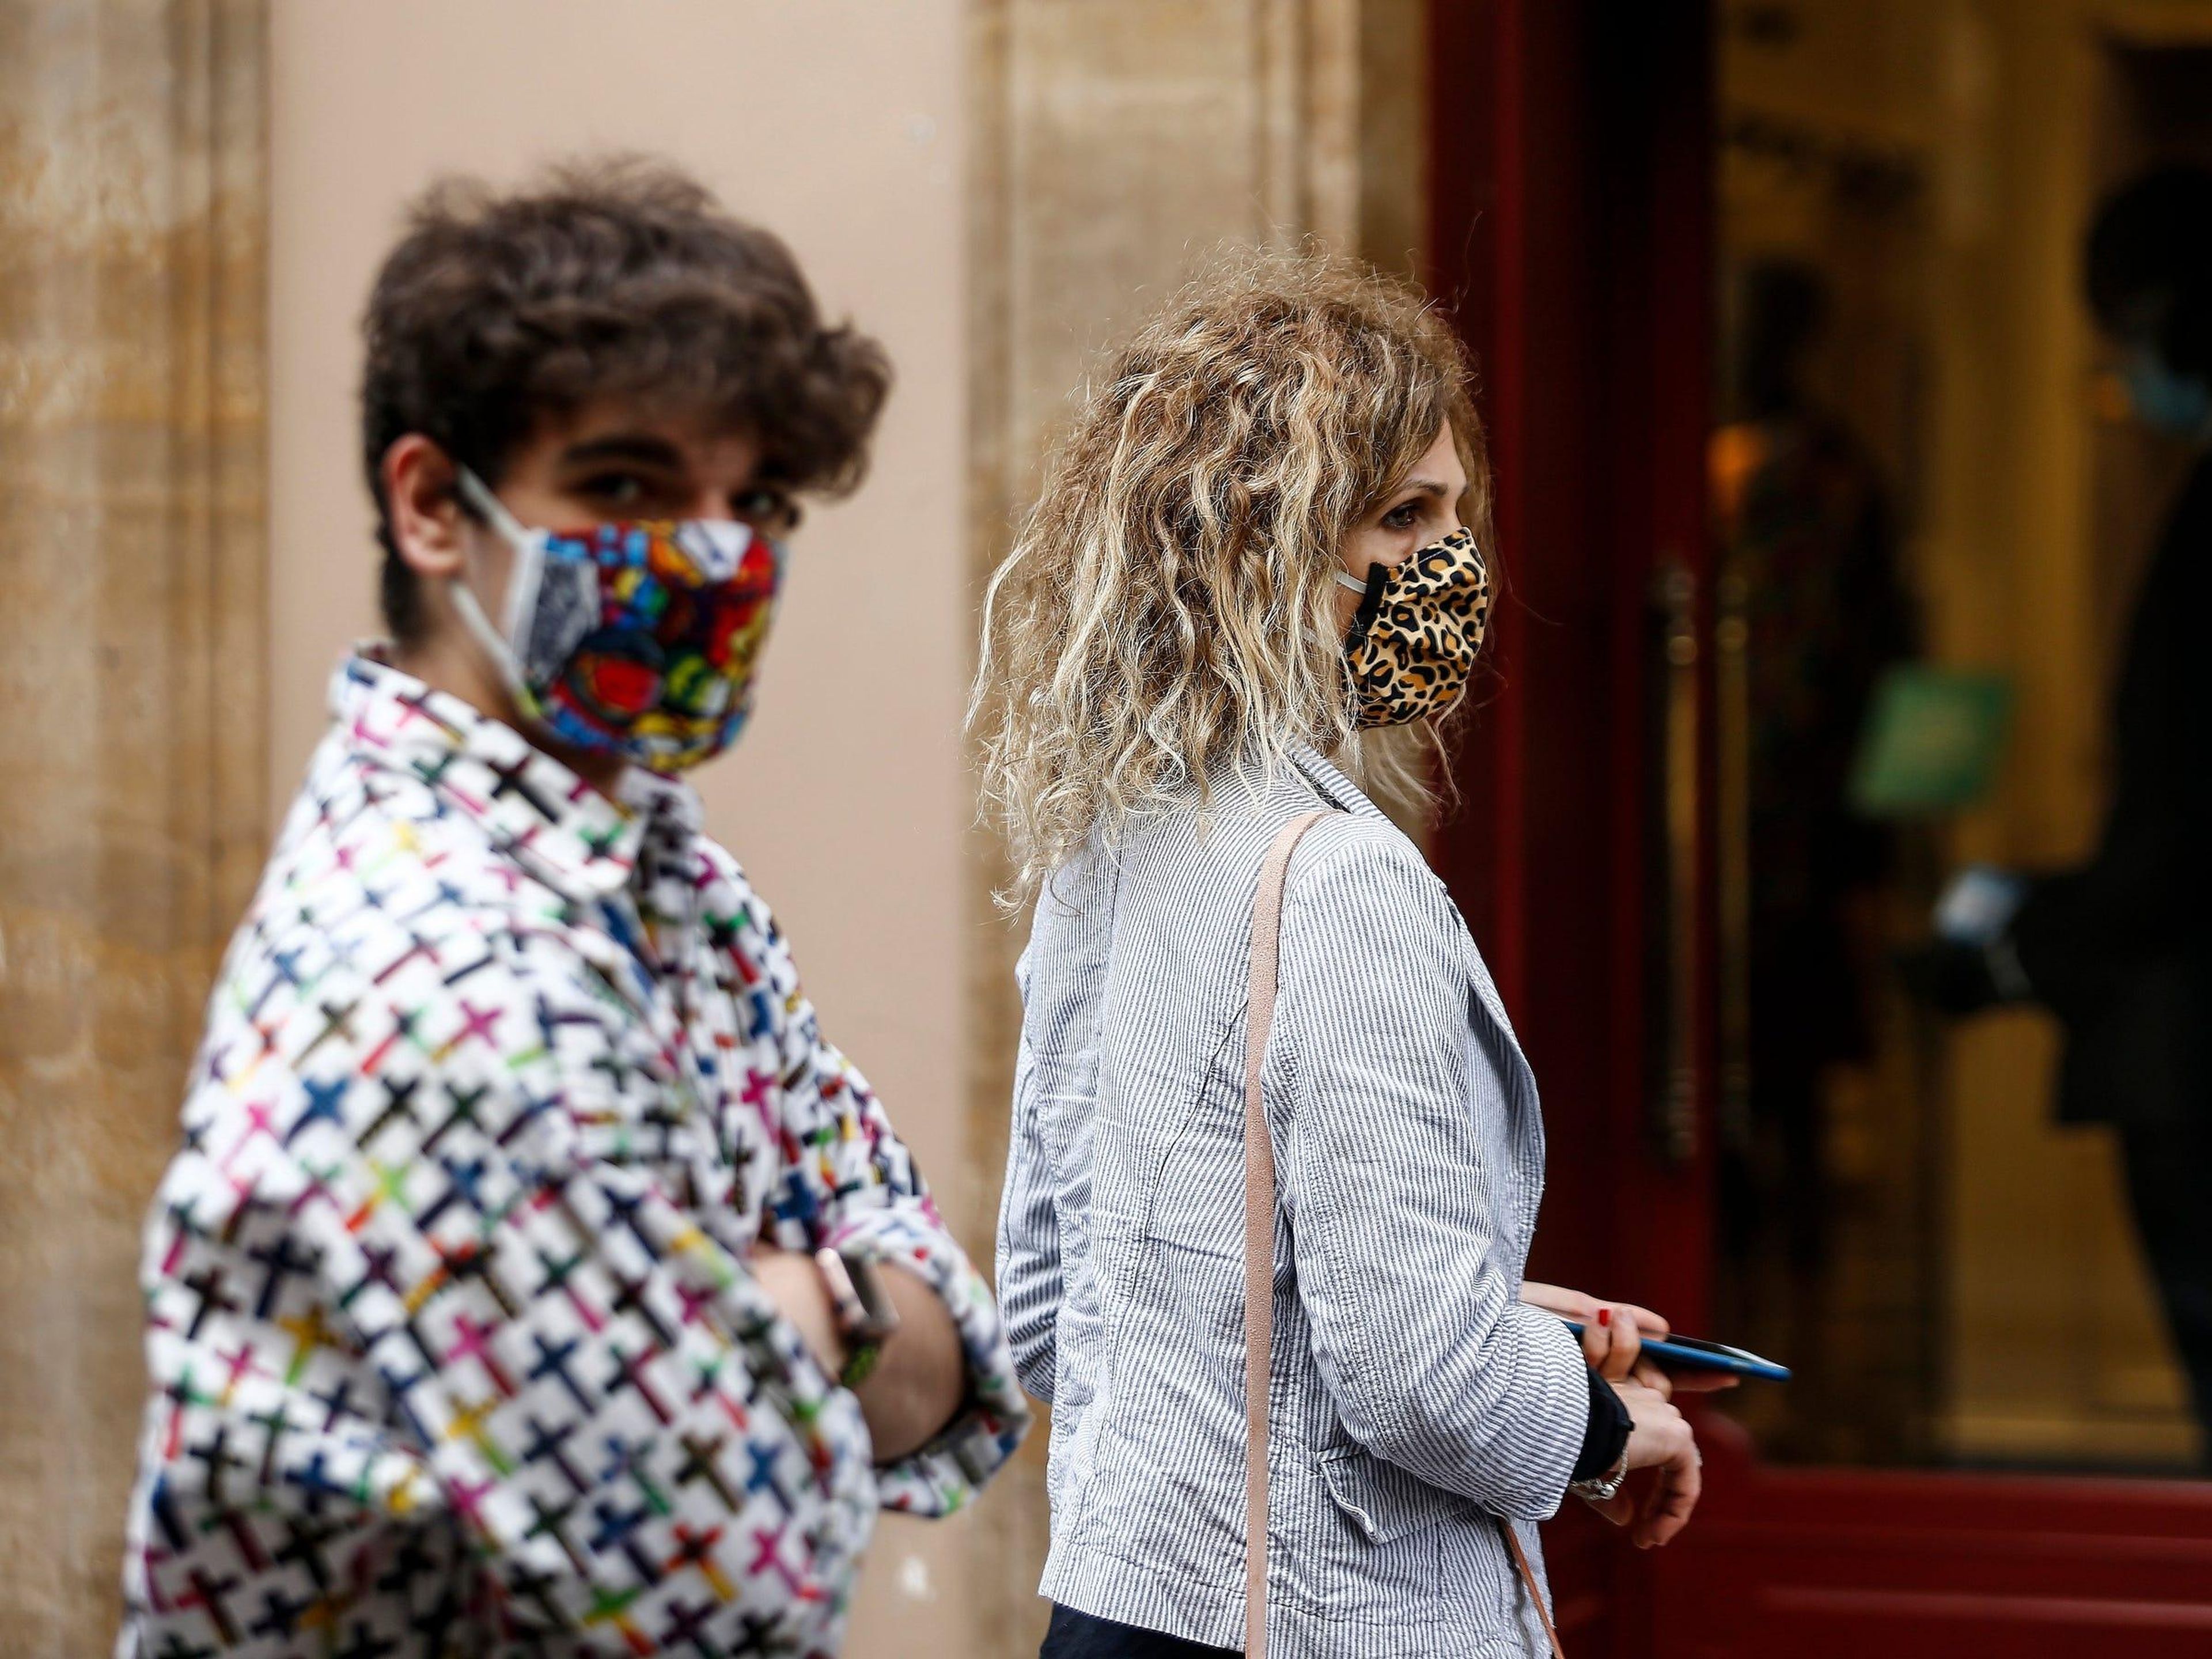 People wearing sanitary masks walk in Via Condotti shopping street, in Rome, Italy, Monday, May 18, 2020. Italy is slowly lifting sanitary restrictions after a two-month coronavirus lockdown. (Cecilia Fabiano/LaPresse via AP)